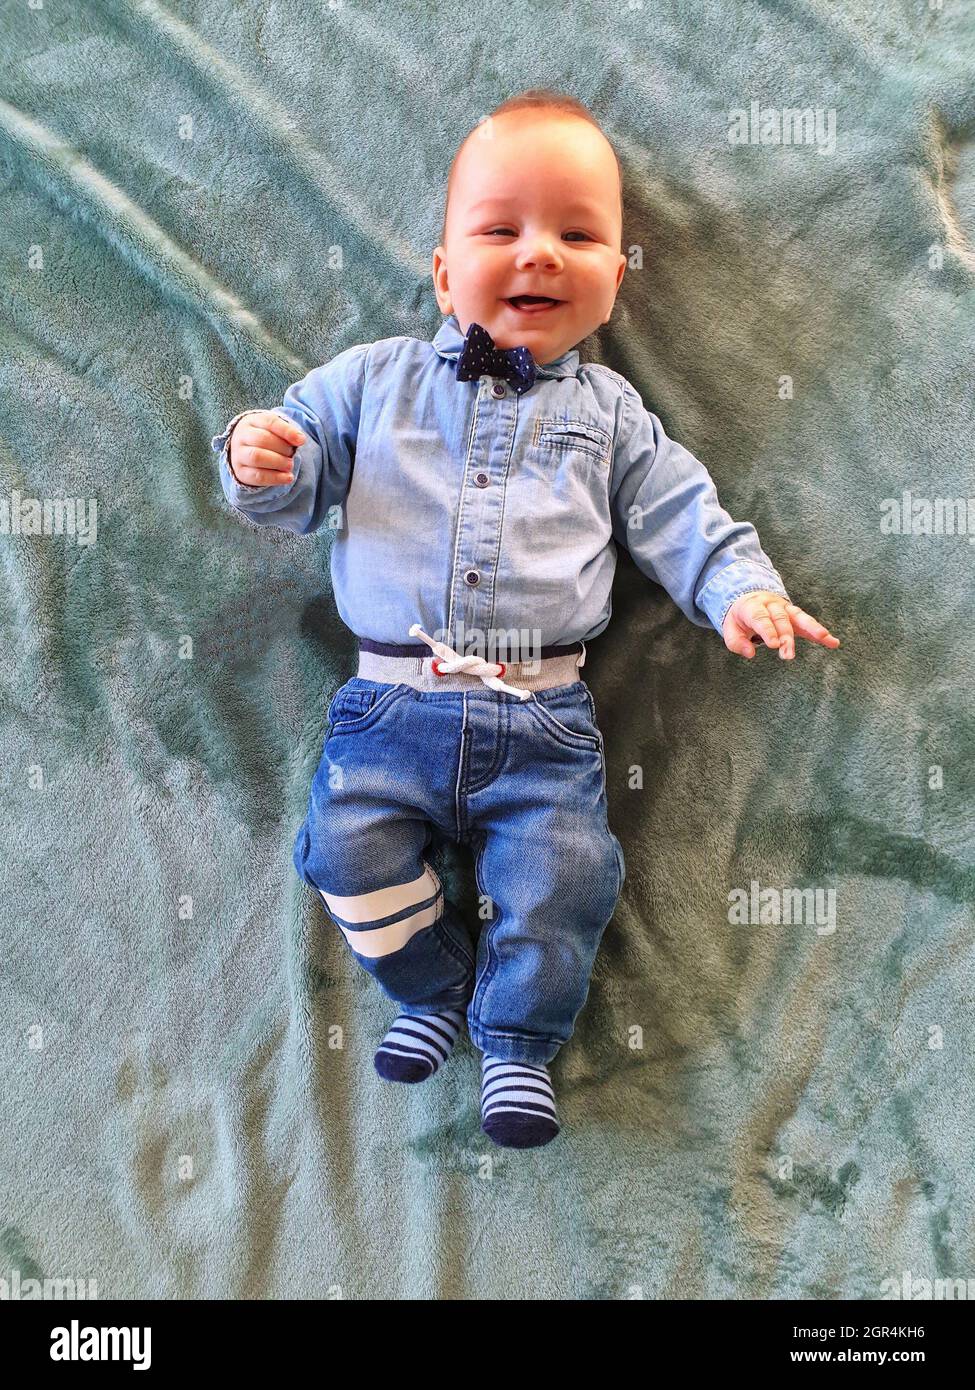 High Angle View Of Newborn Baby In Jeans And Bow Tie Relaxing On Bed Stock  Photo - Alamy